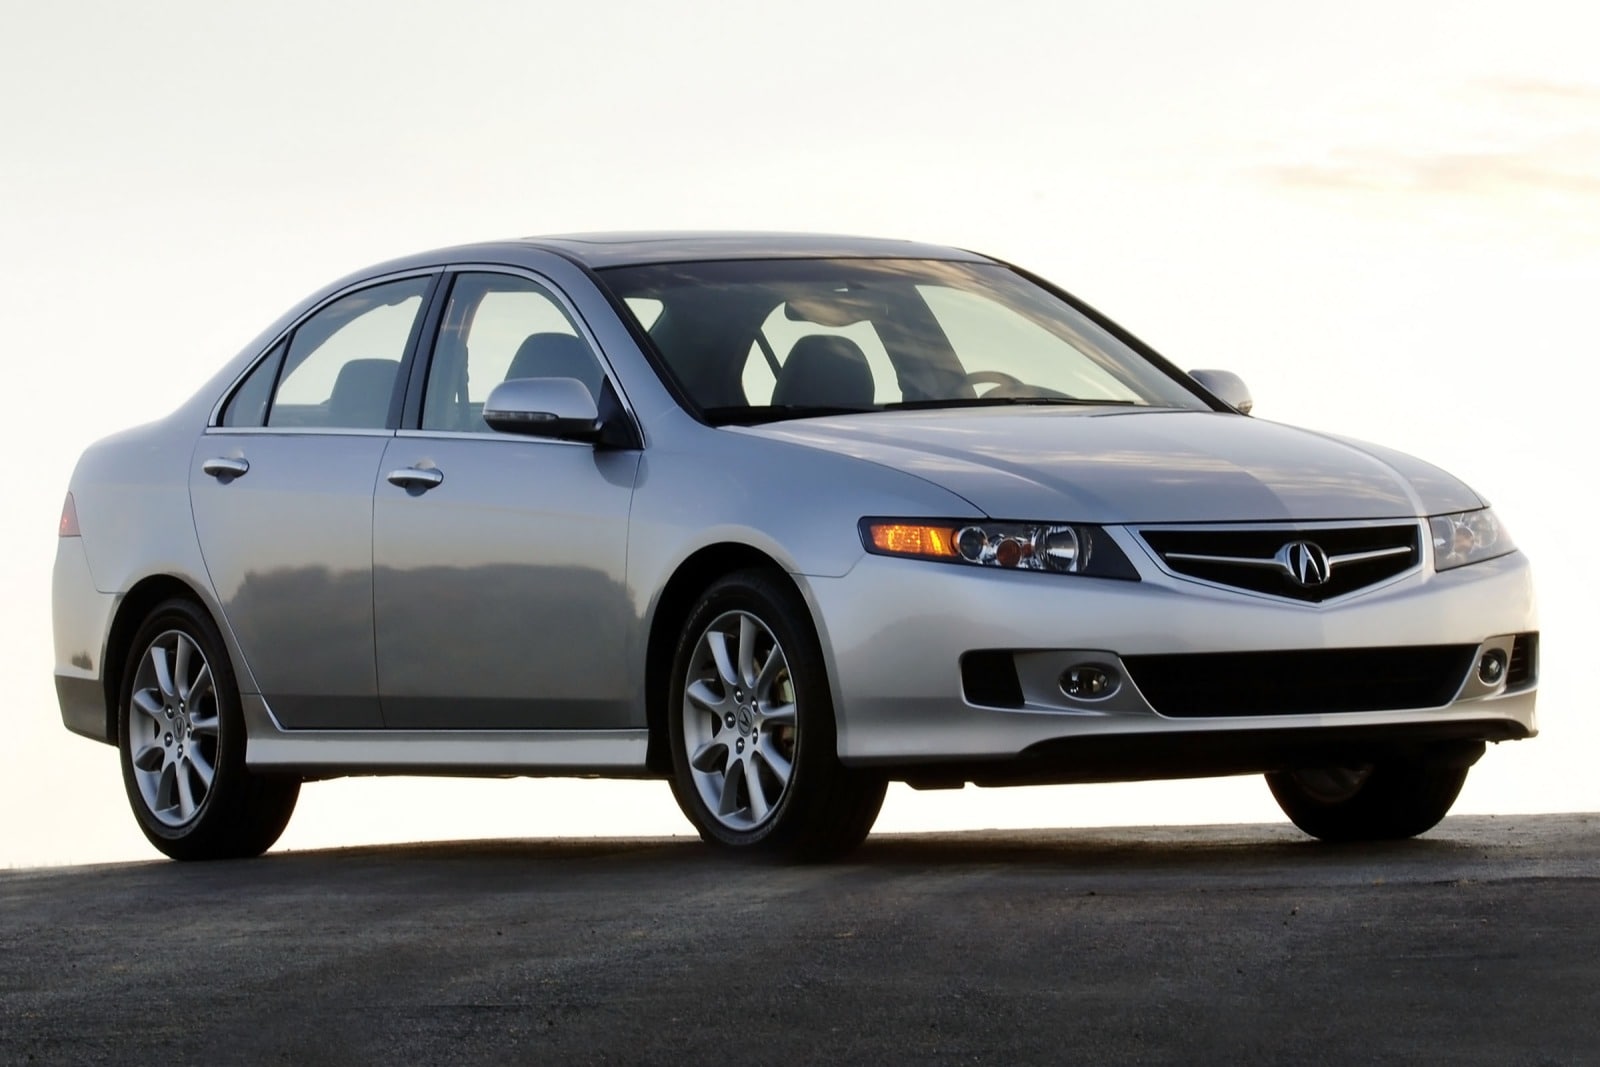 2007 Acura TSX Review & Ratings | Edmunds